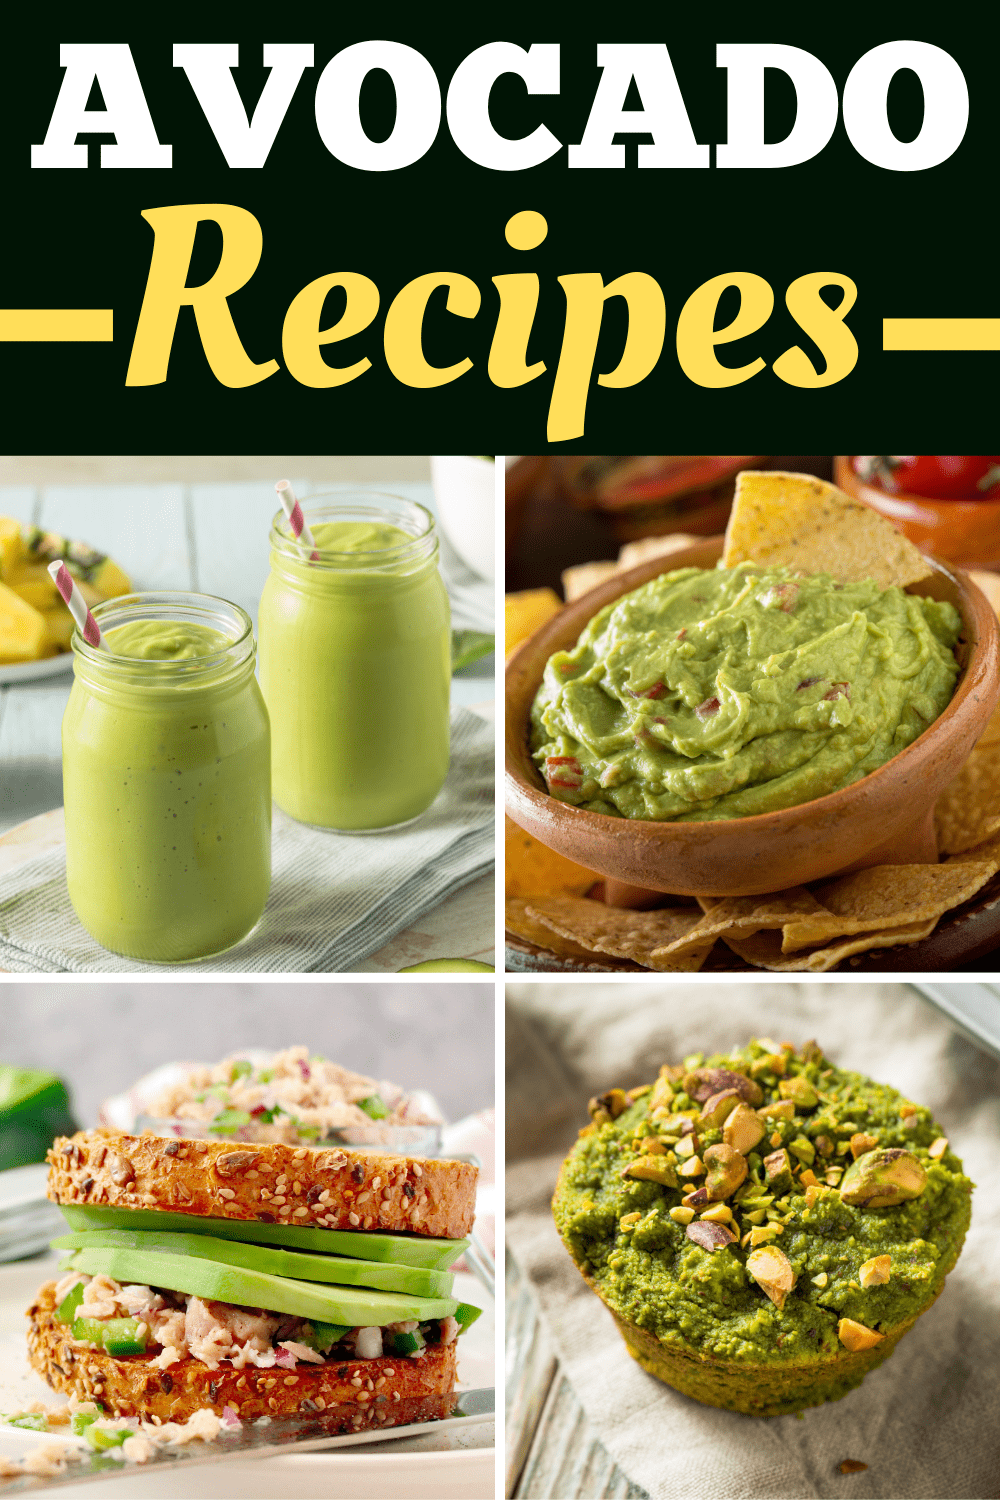 50 Avocado Recipes (For Breakfast, Lunch, or Dinner) - Insanely Good